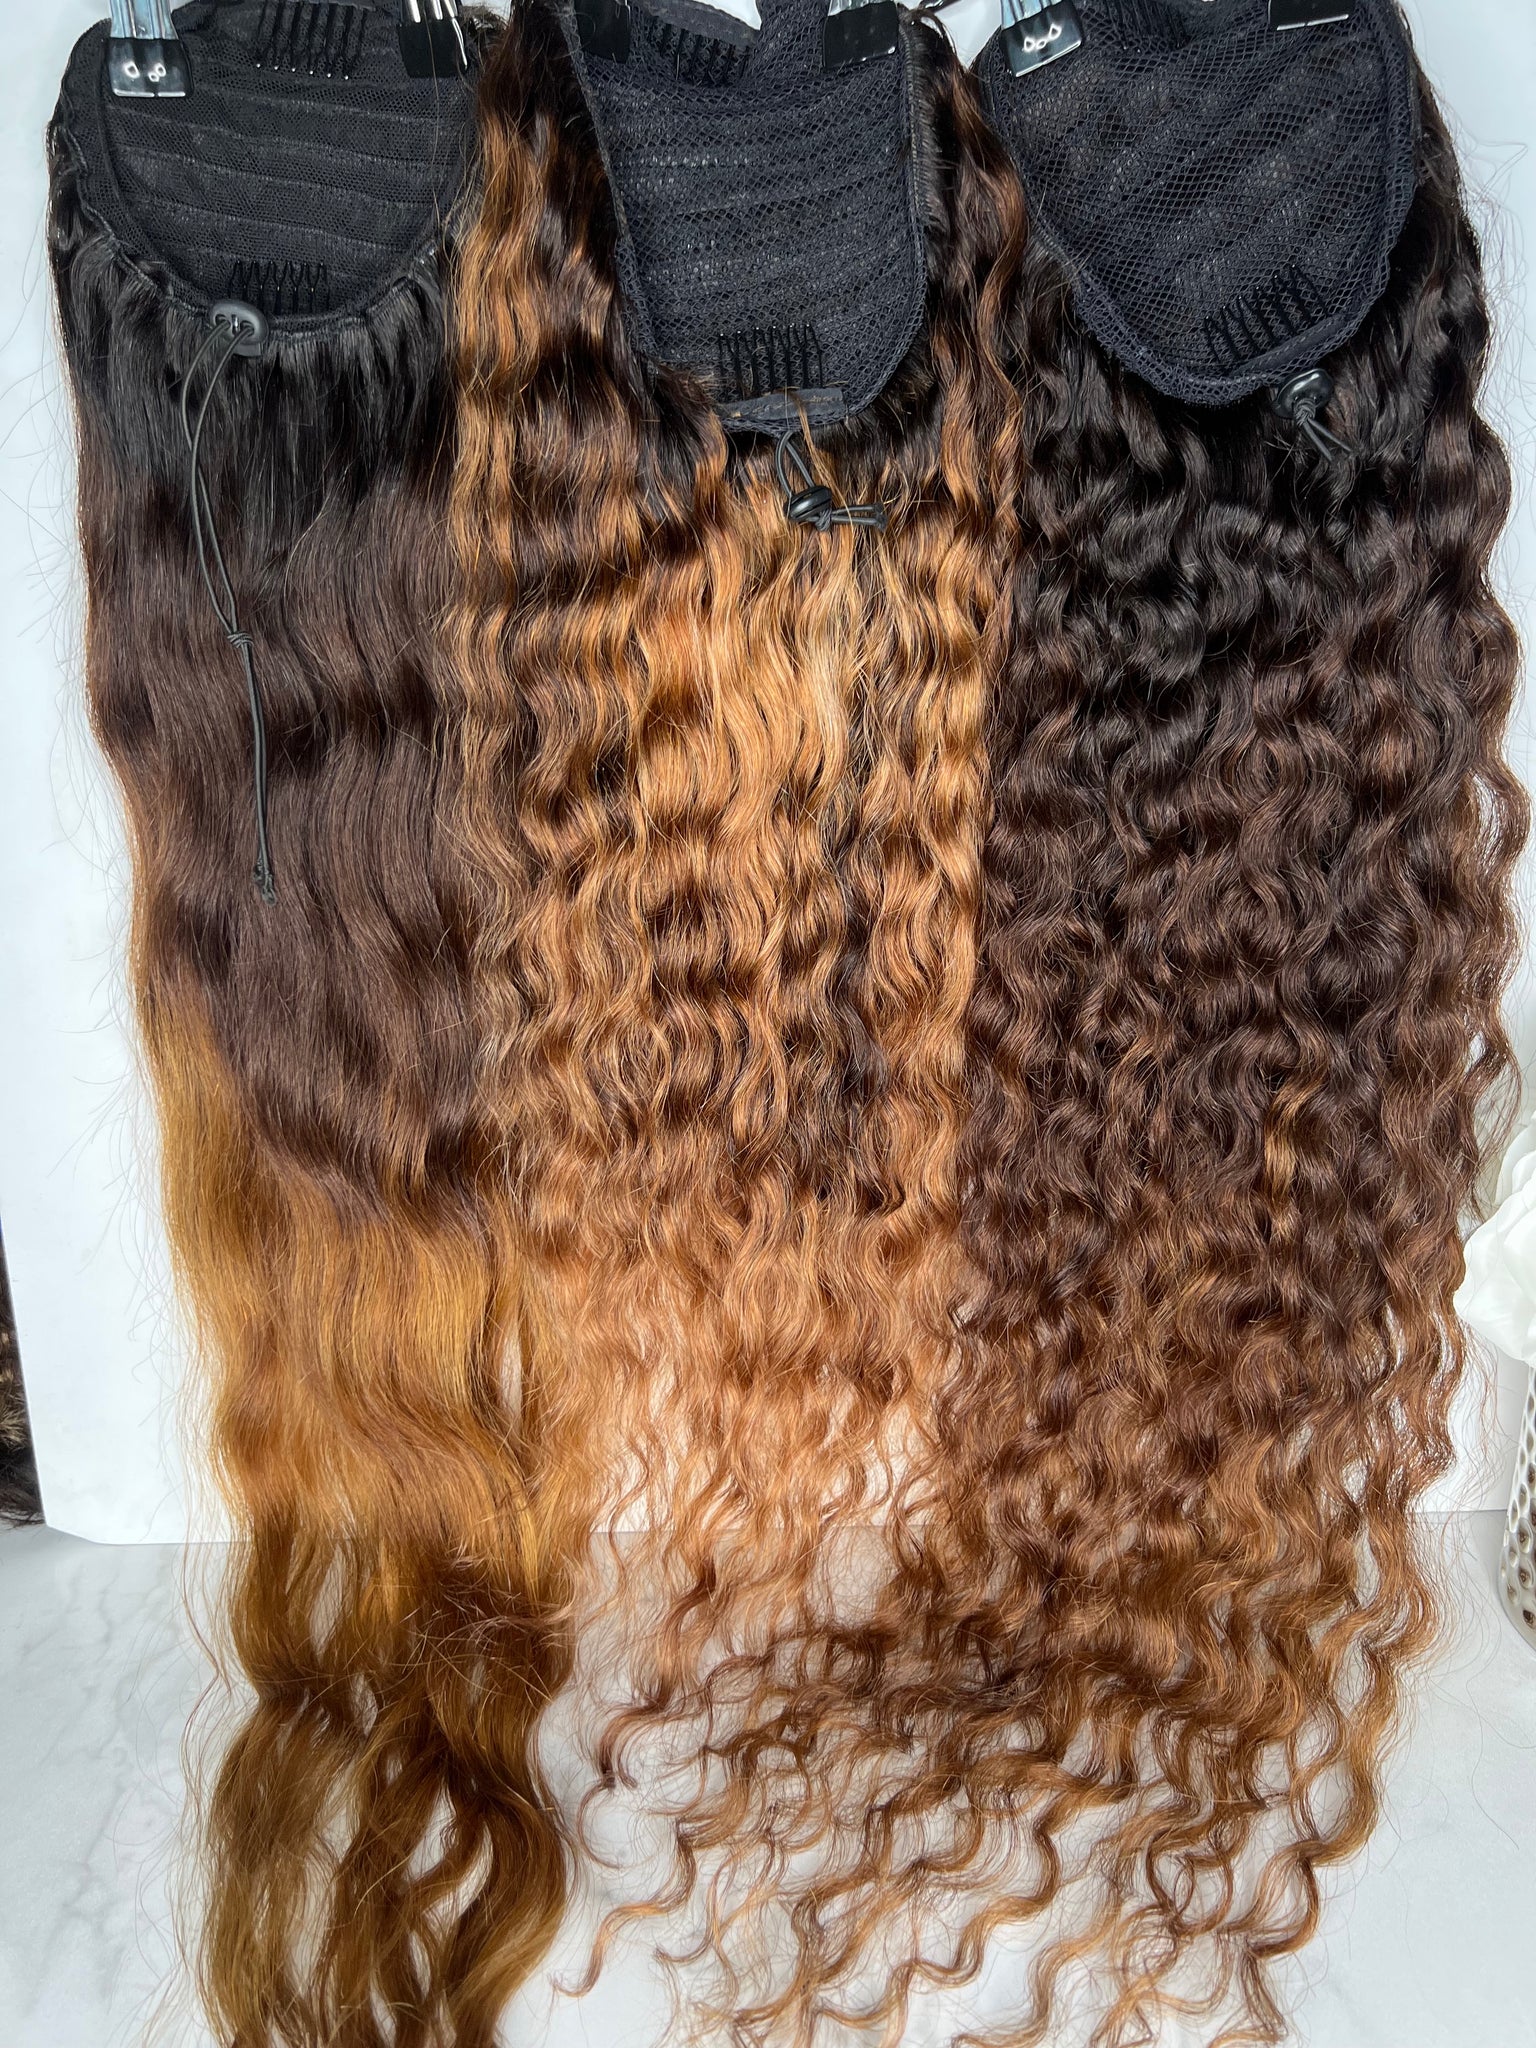 Ombre’: Indian Wavy Ponytail Custom Colored